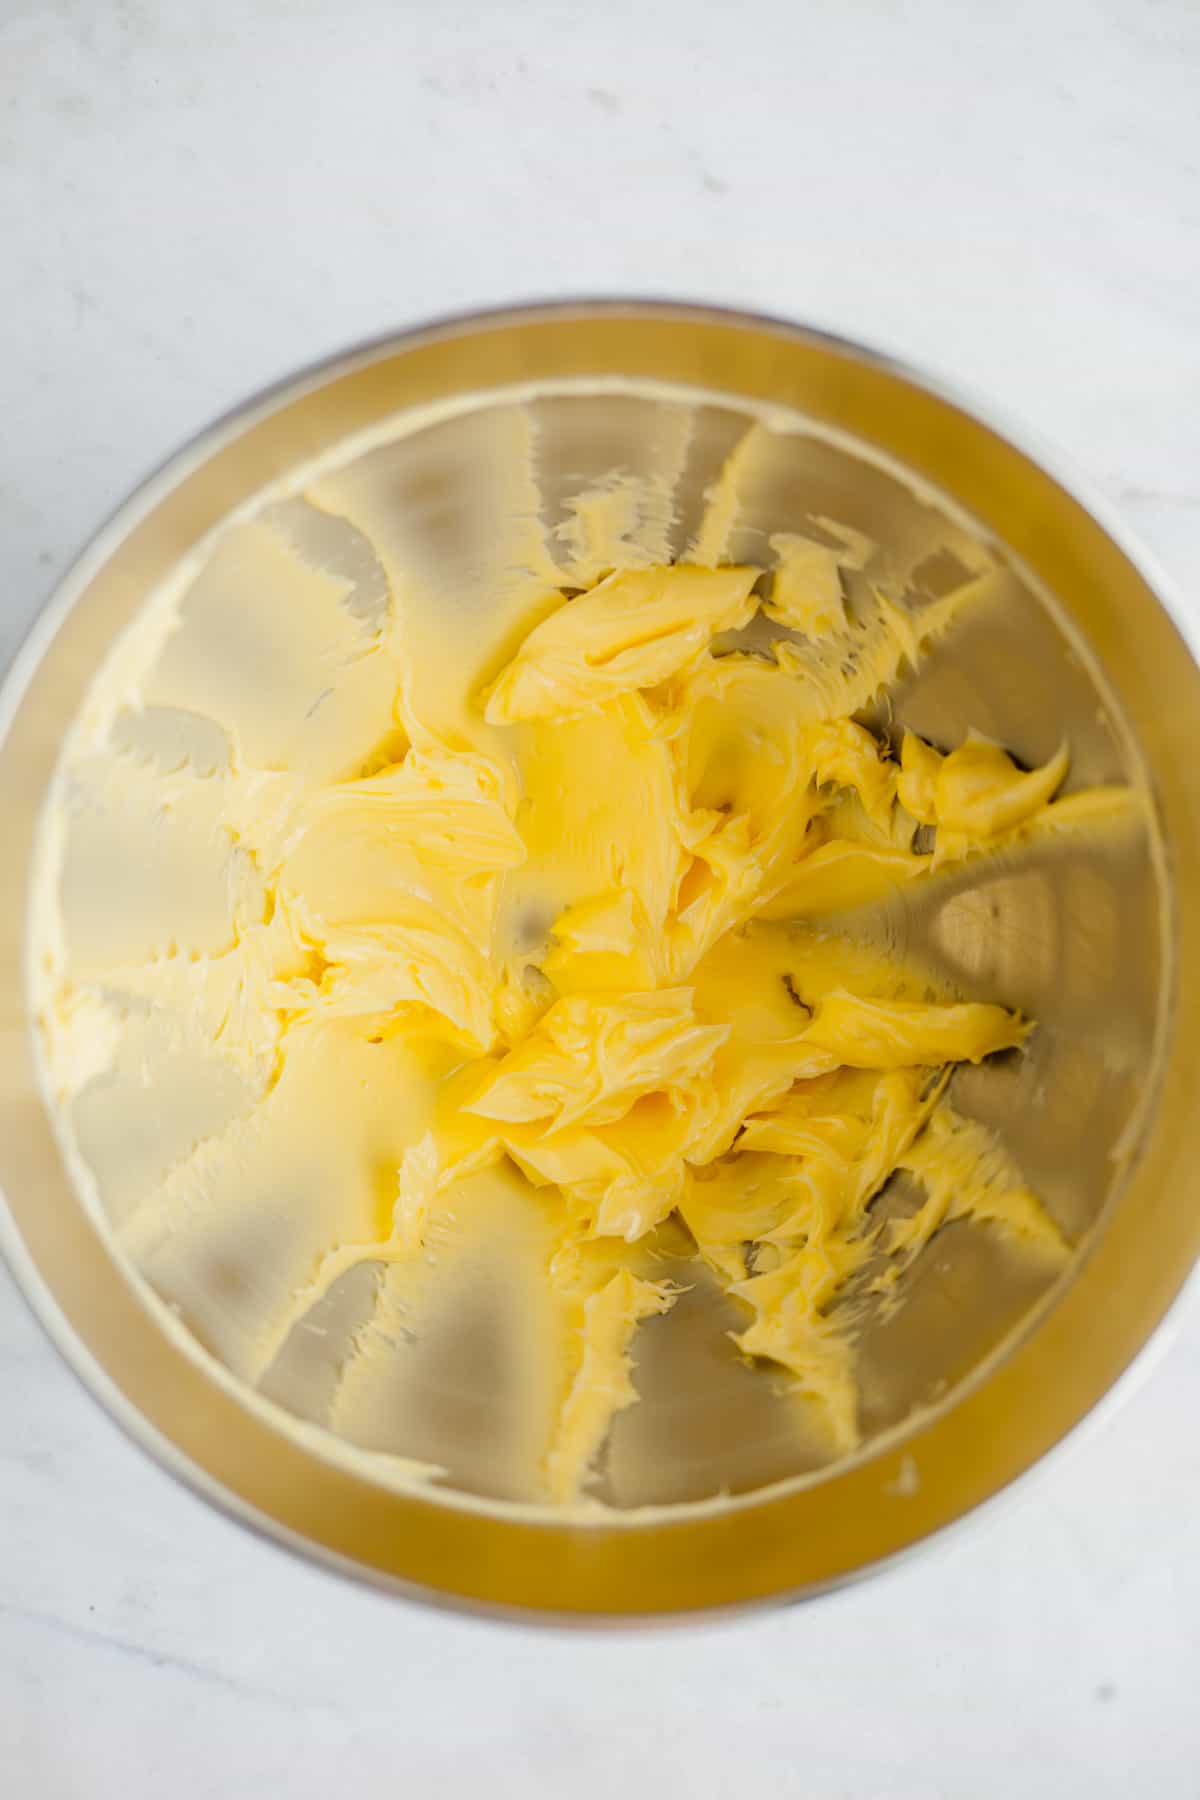 Creamed butter in a silver mixing bowl